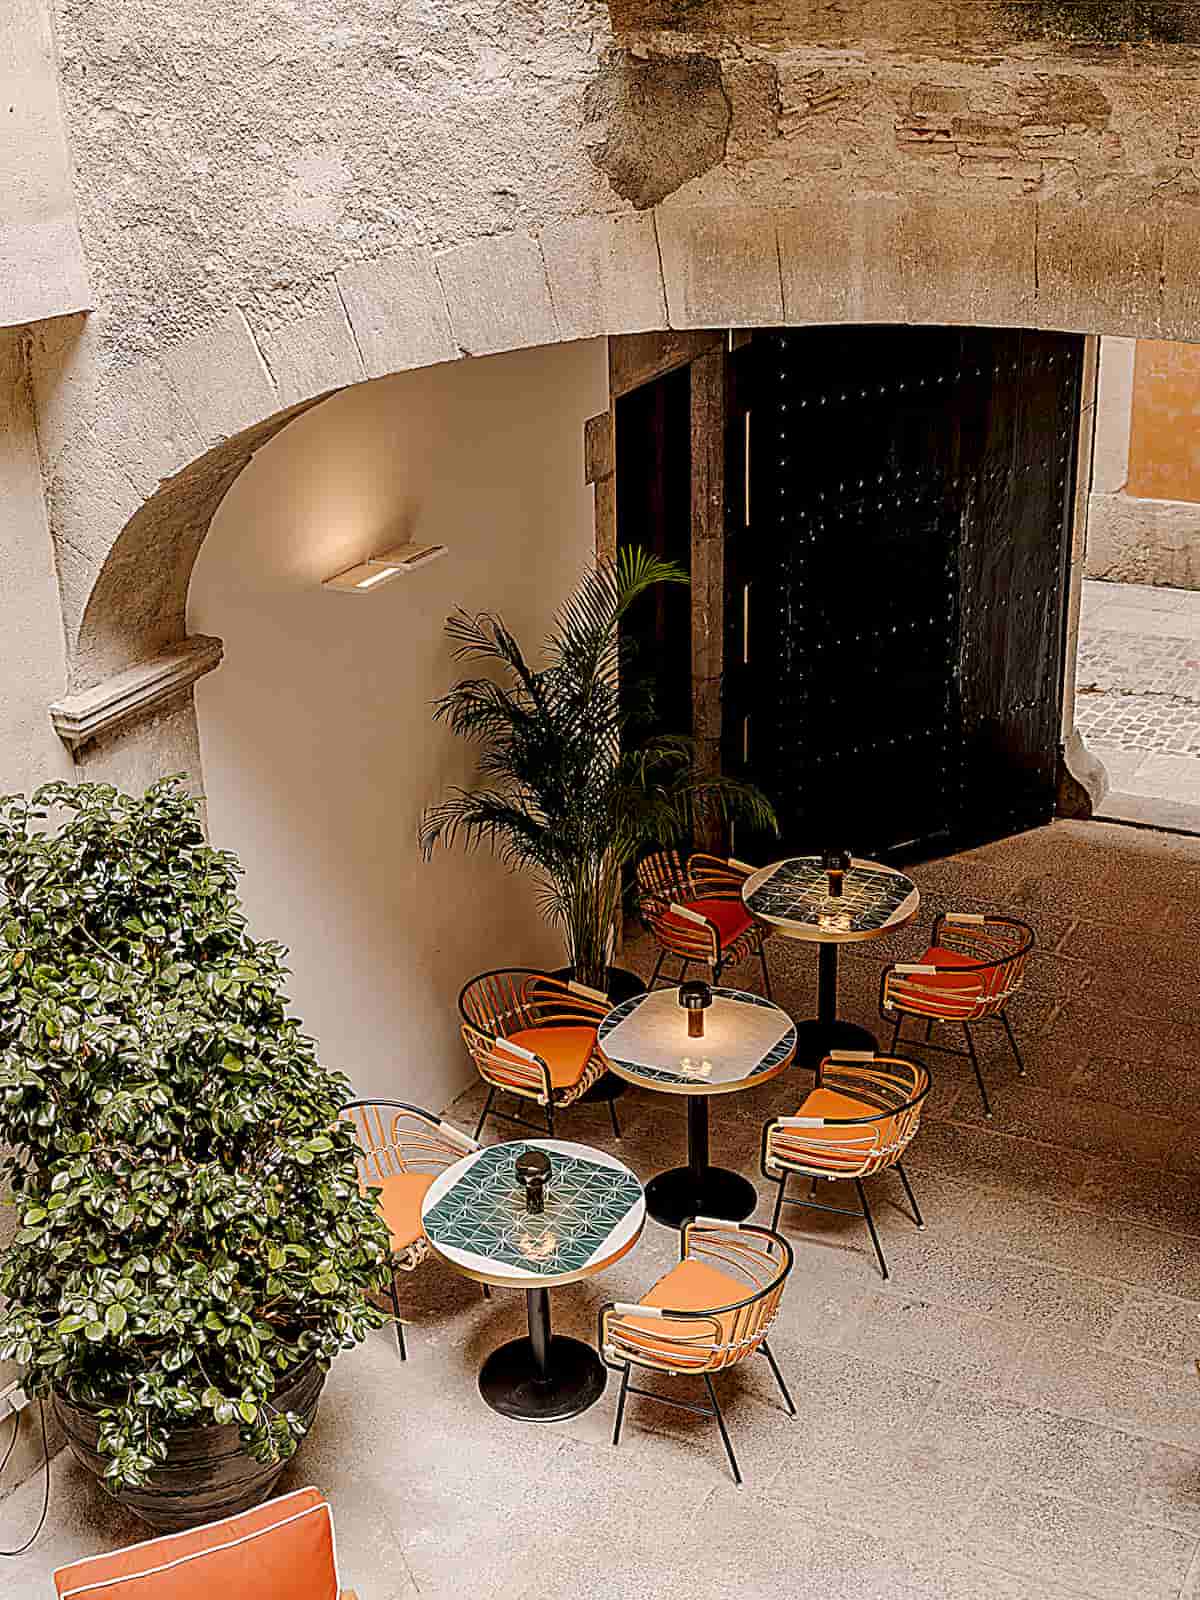 Palau Fugit A Hotel in Girona, Spain, Animates its Historic Premises with Comtemporary Art & Design 